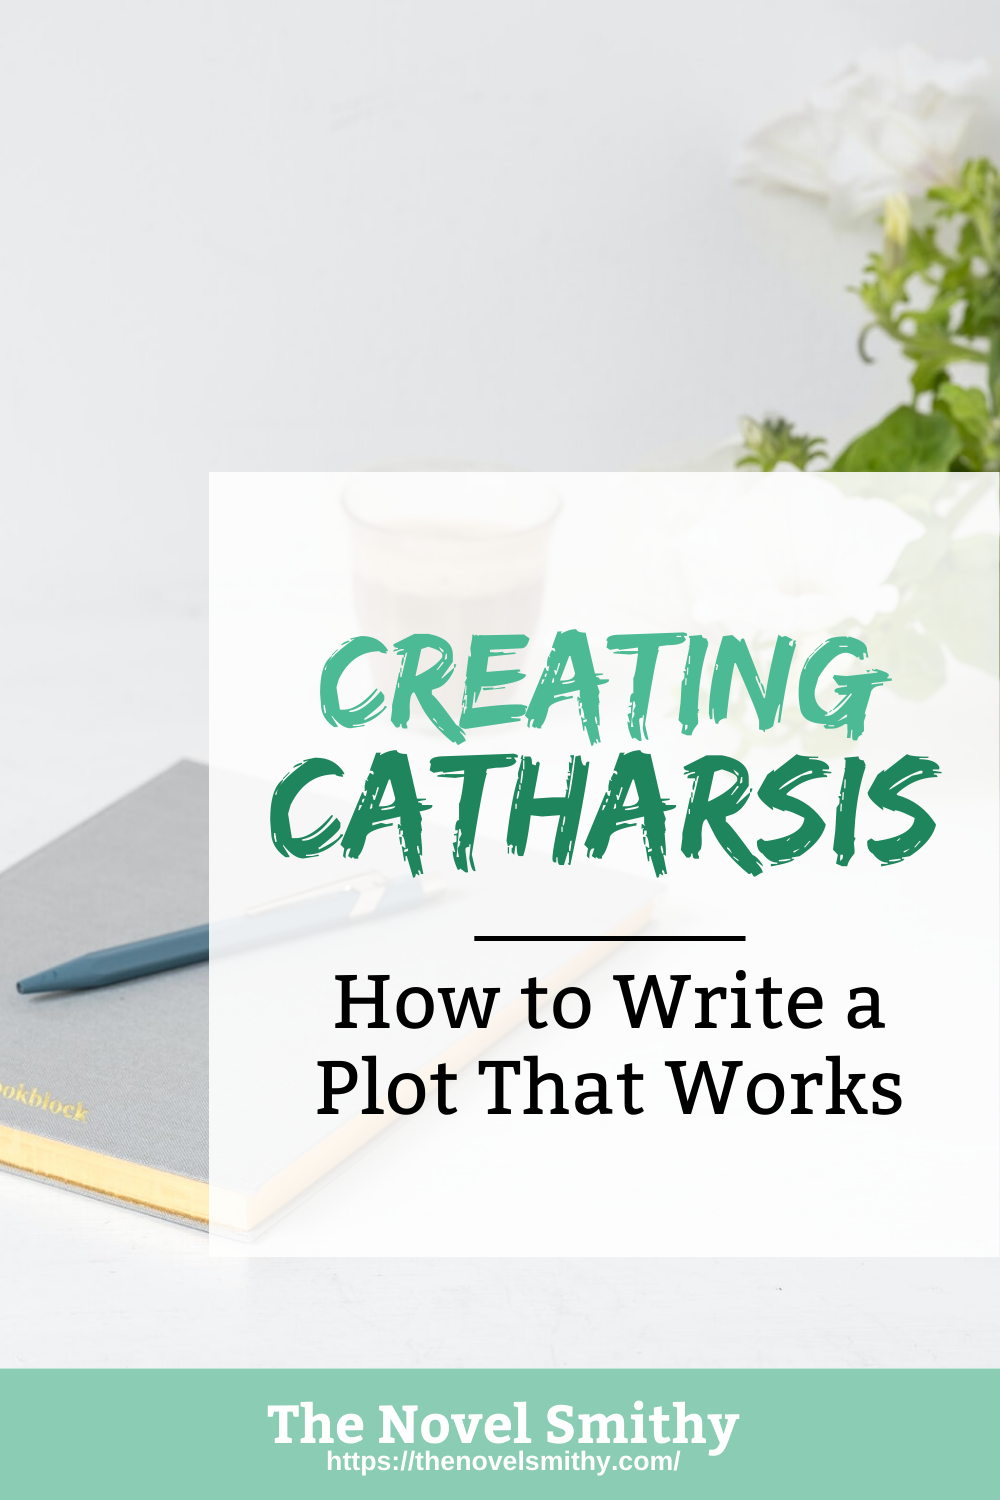 Creating Catharsis: How to Write a Plot That Works